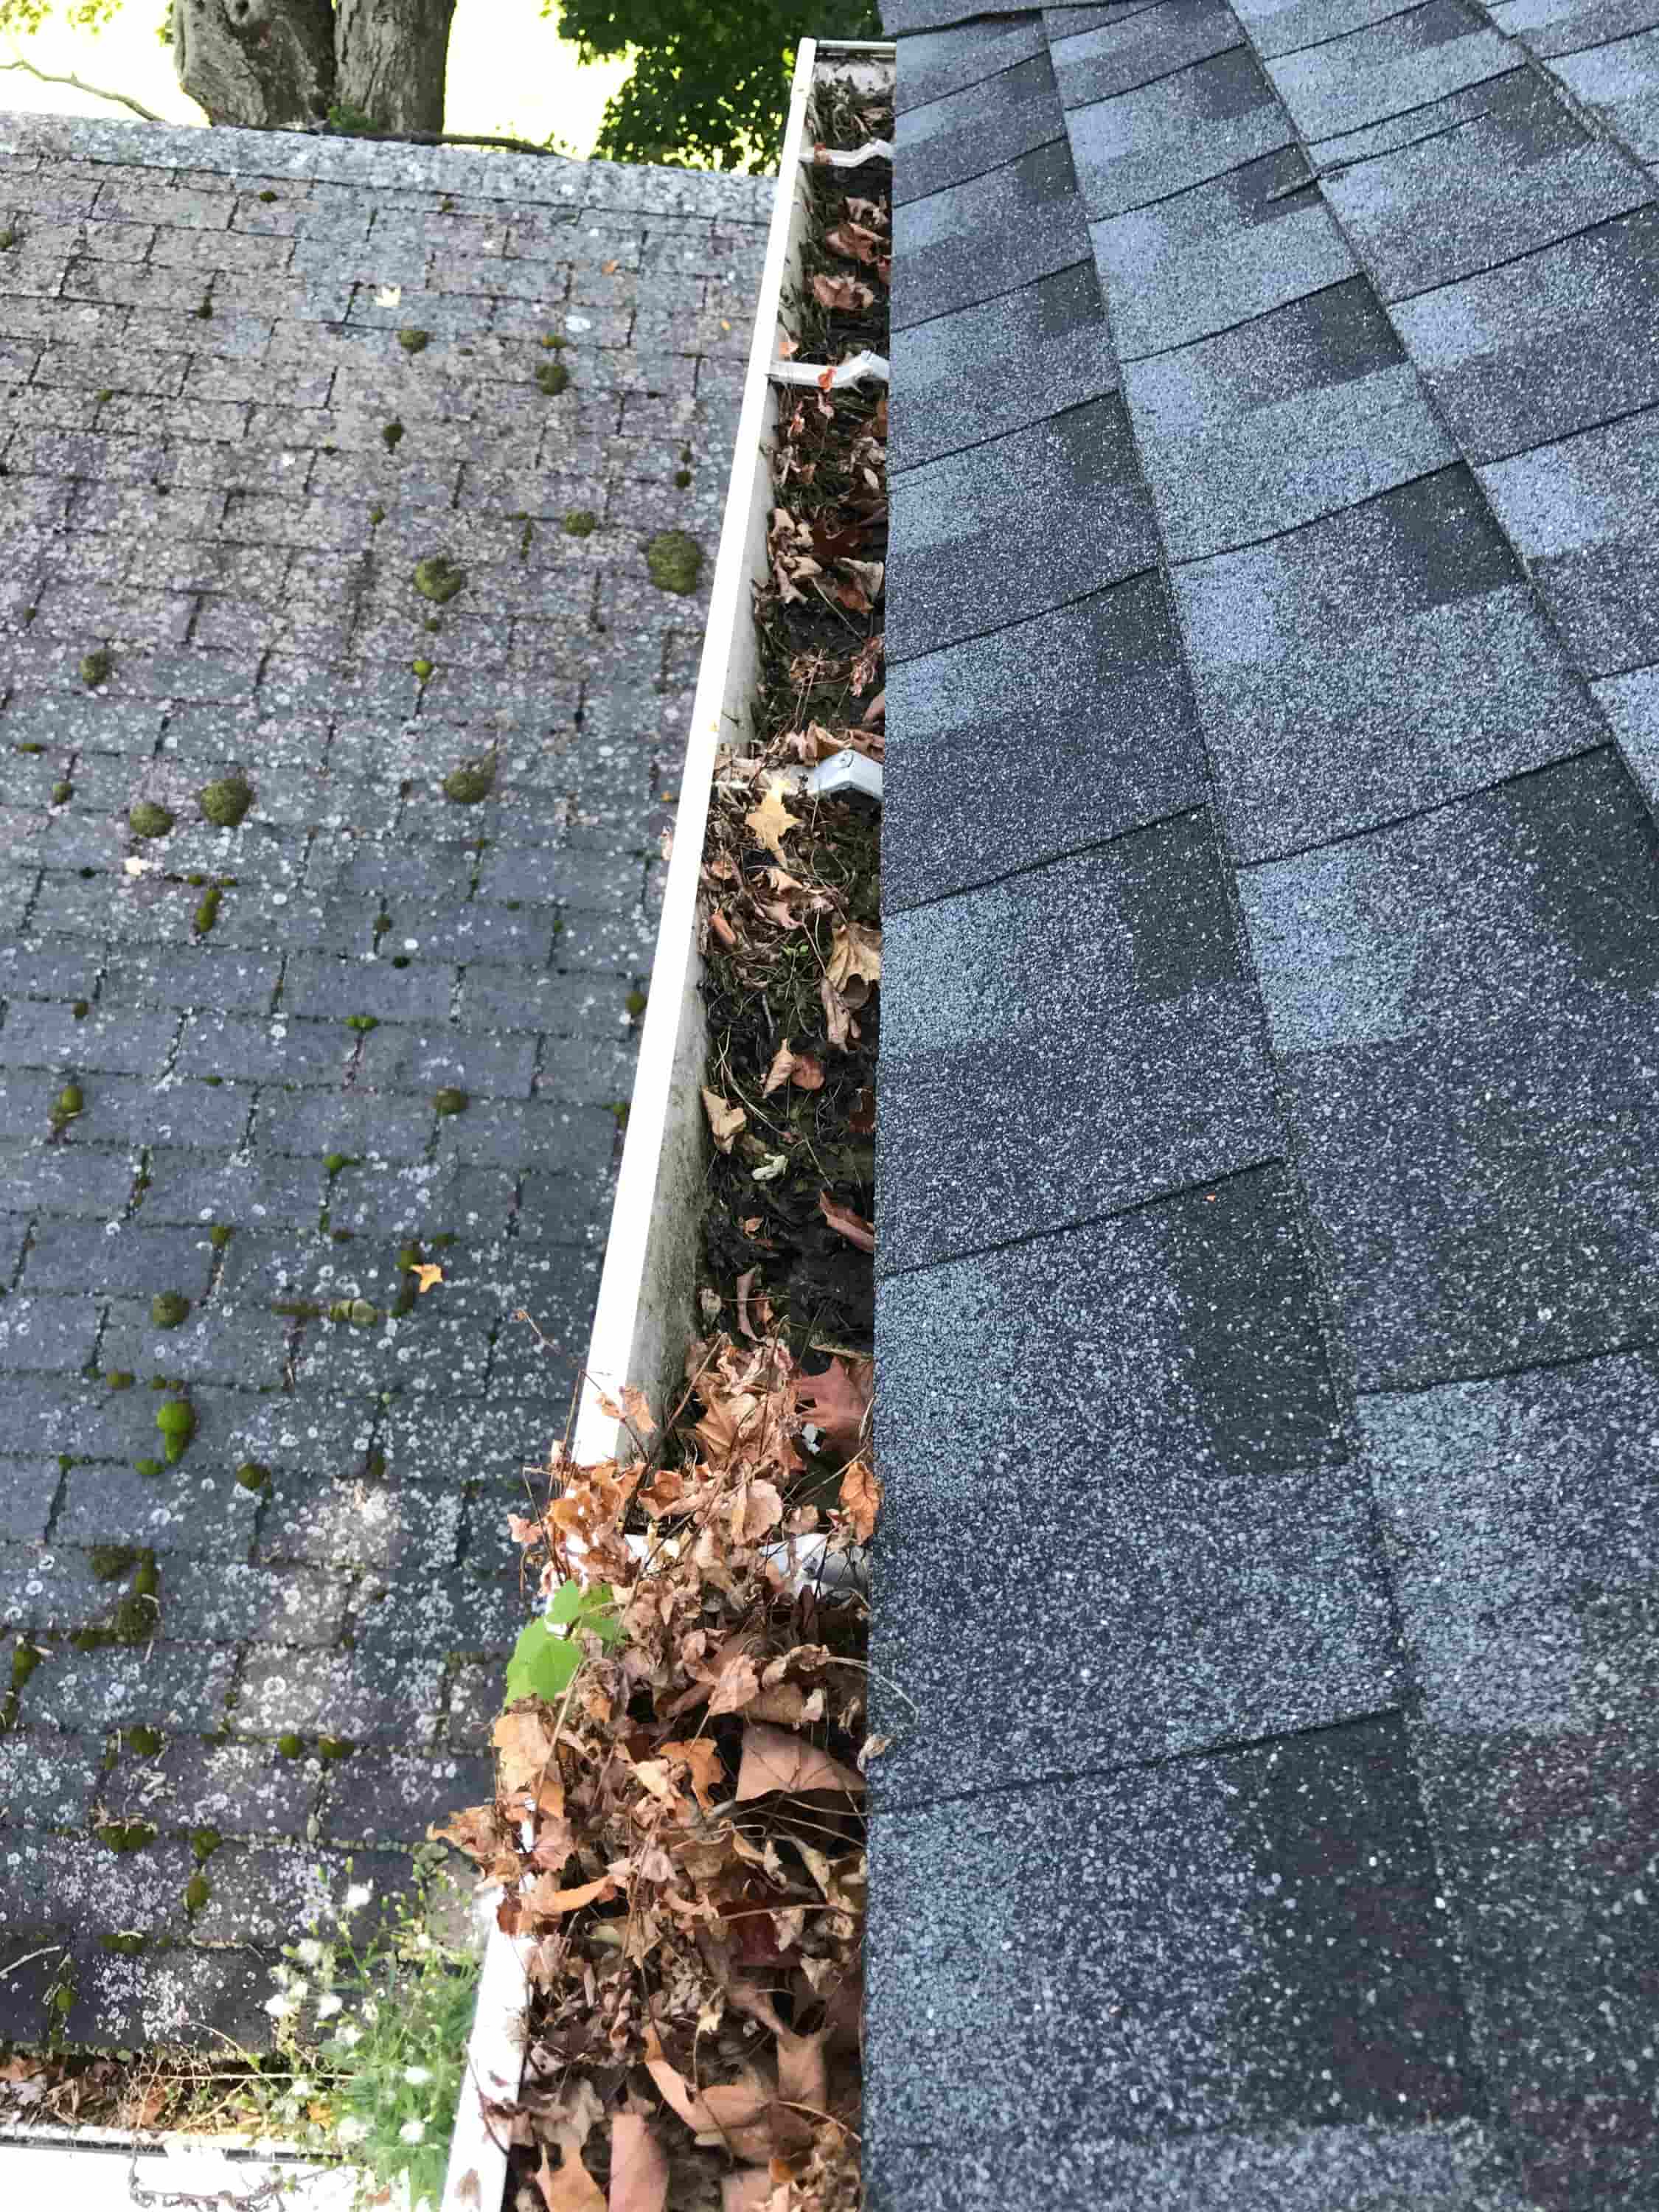 cost of gutter cleaning services